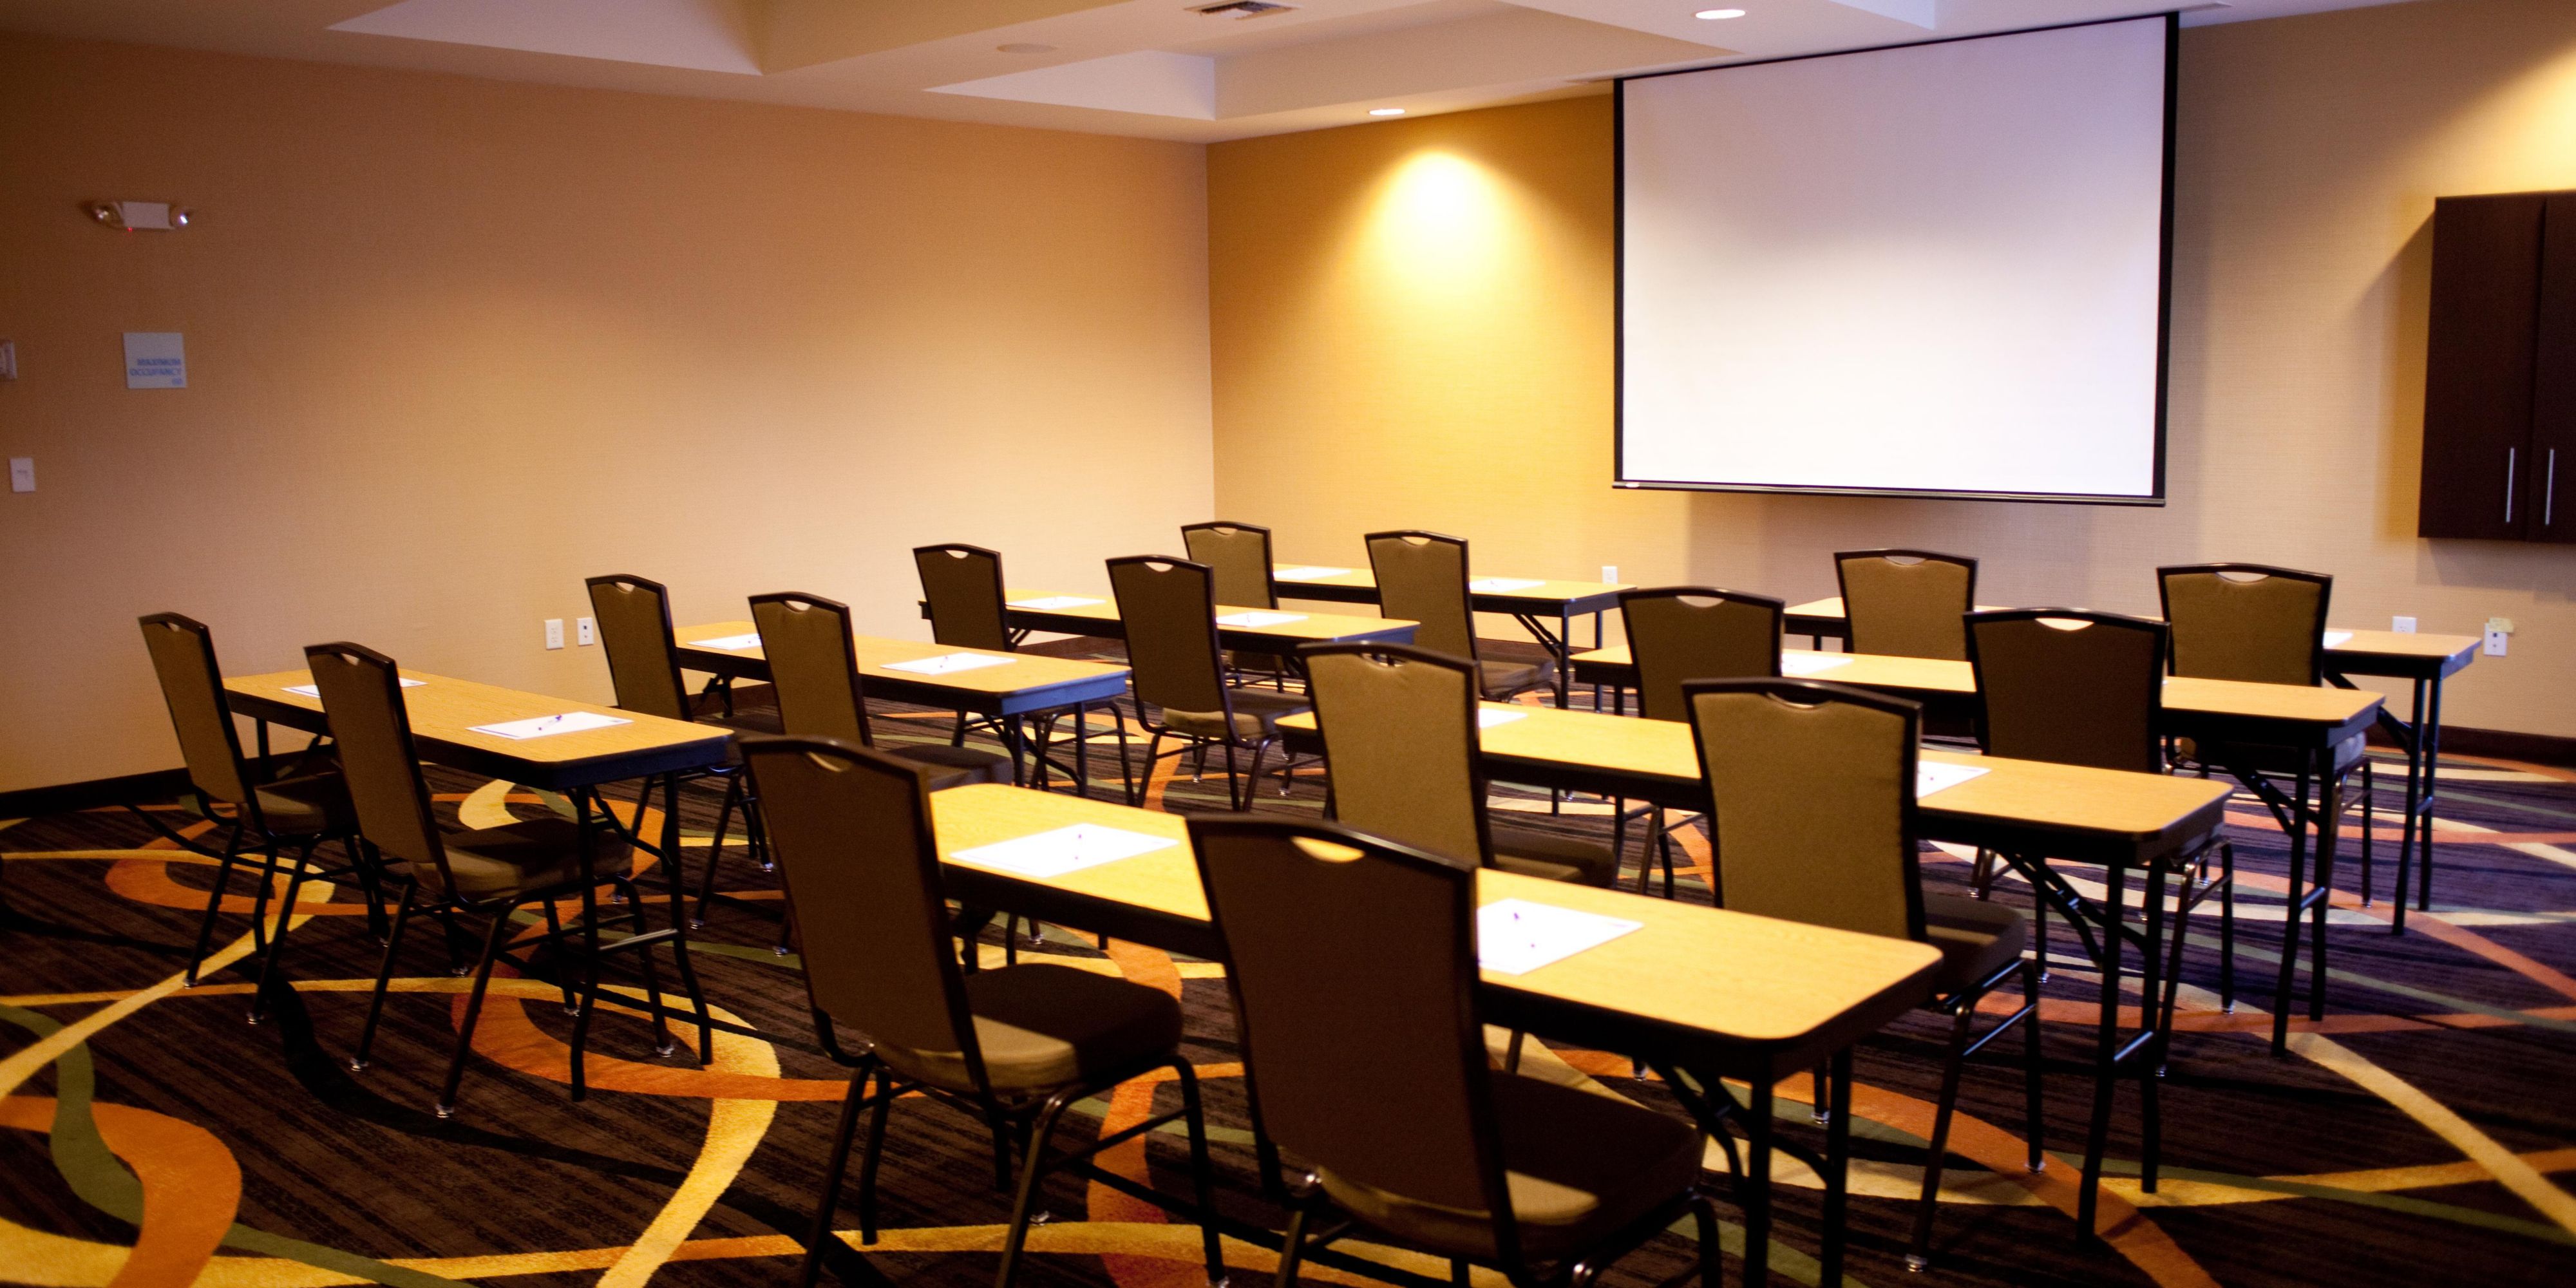 Allow us to host your next meeting. We offer 940 square feet of meeting space that includes all the essentials for a perfect meeting. Take advantage of multiple room set-ups for up to 50 attendees, A/V projector and drop down screen, whiteboard, business center and more.